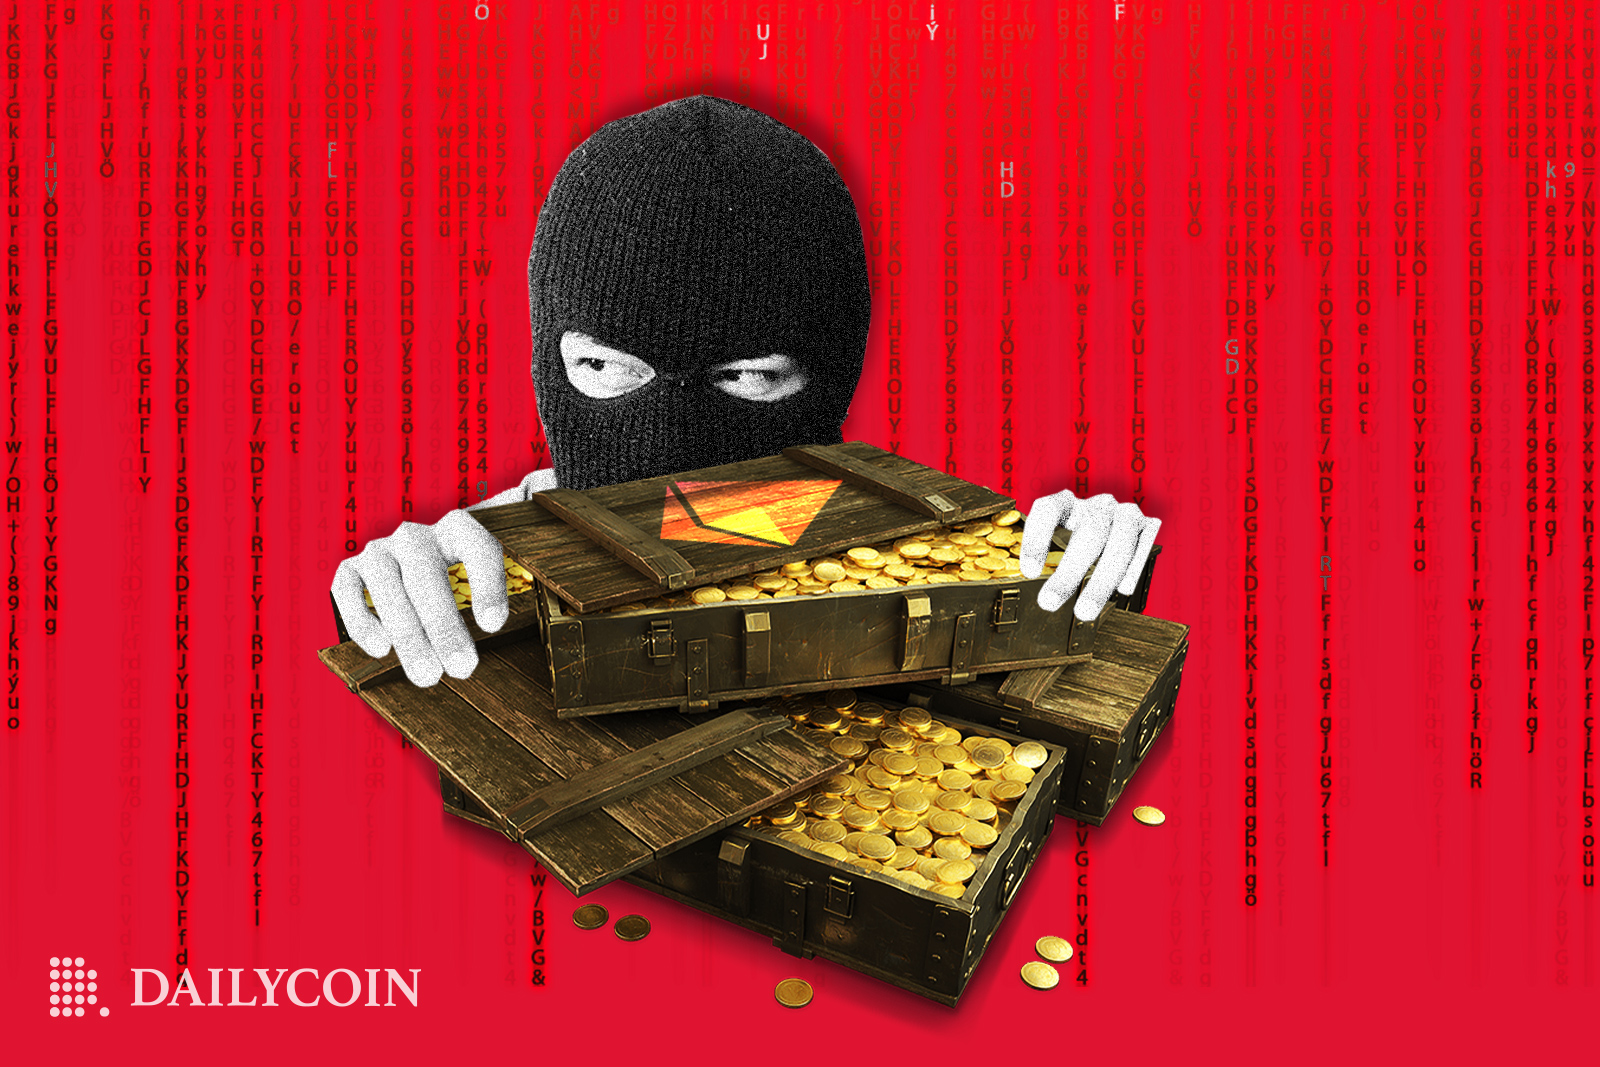 A person with a black mask on is hiding behind brown chests full of gold coins on a red background